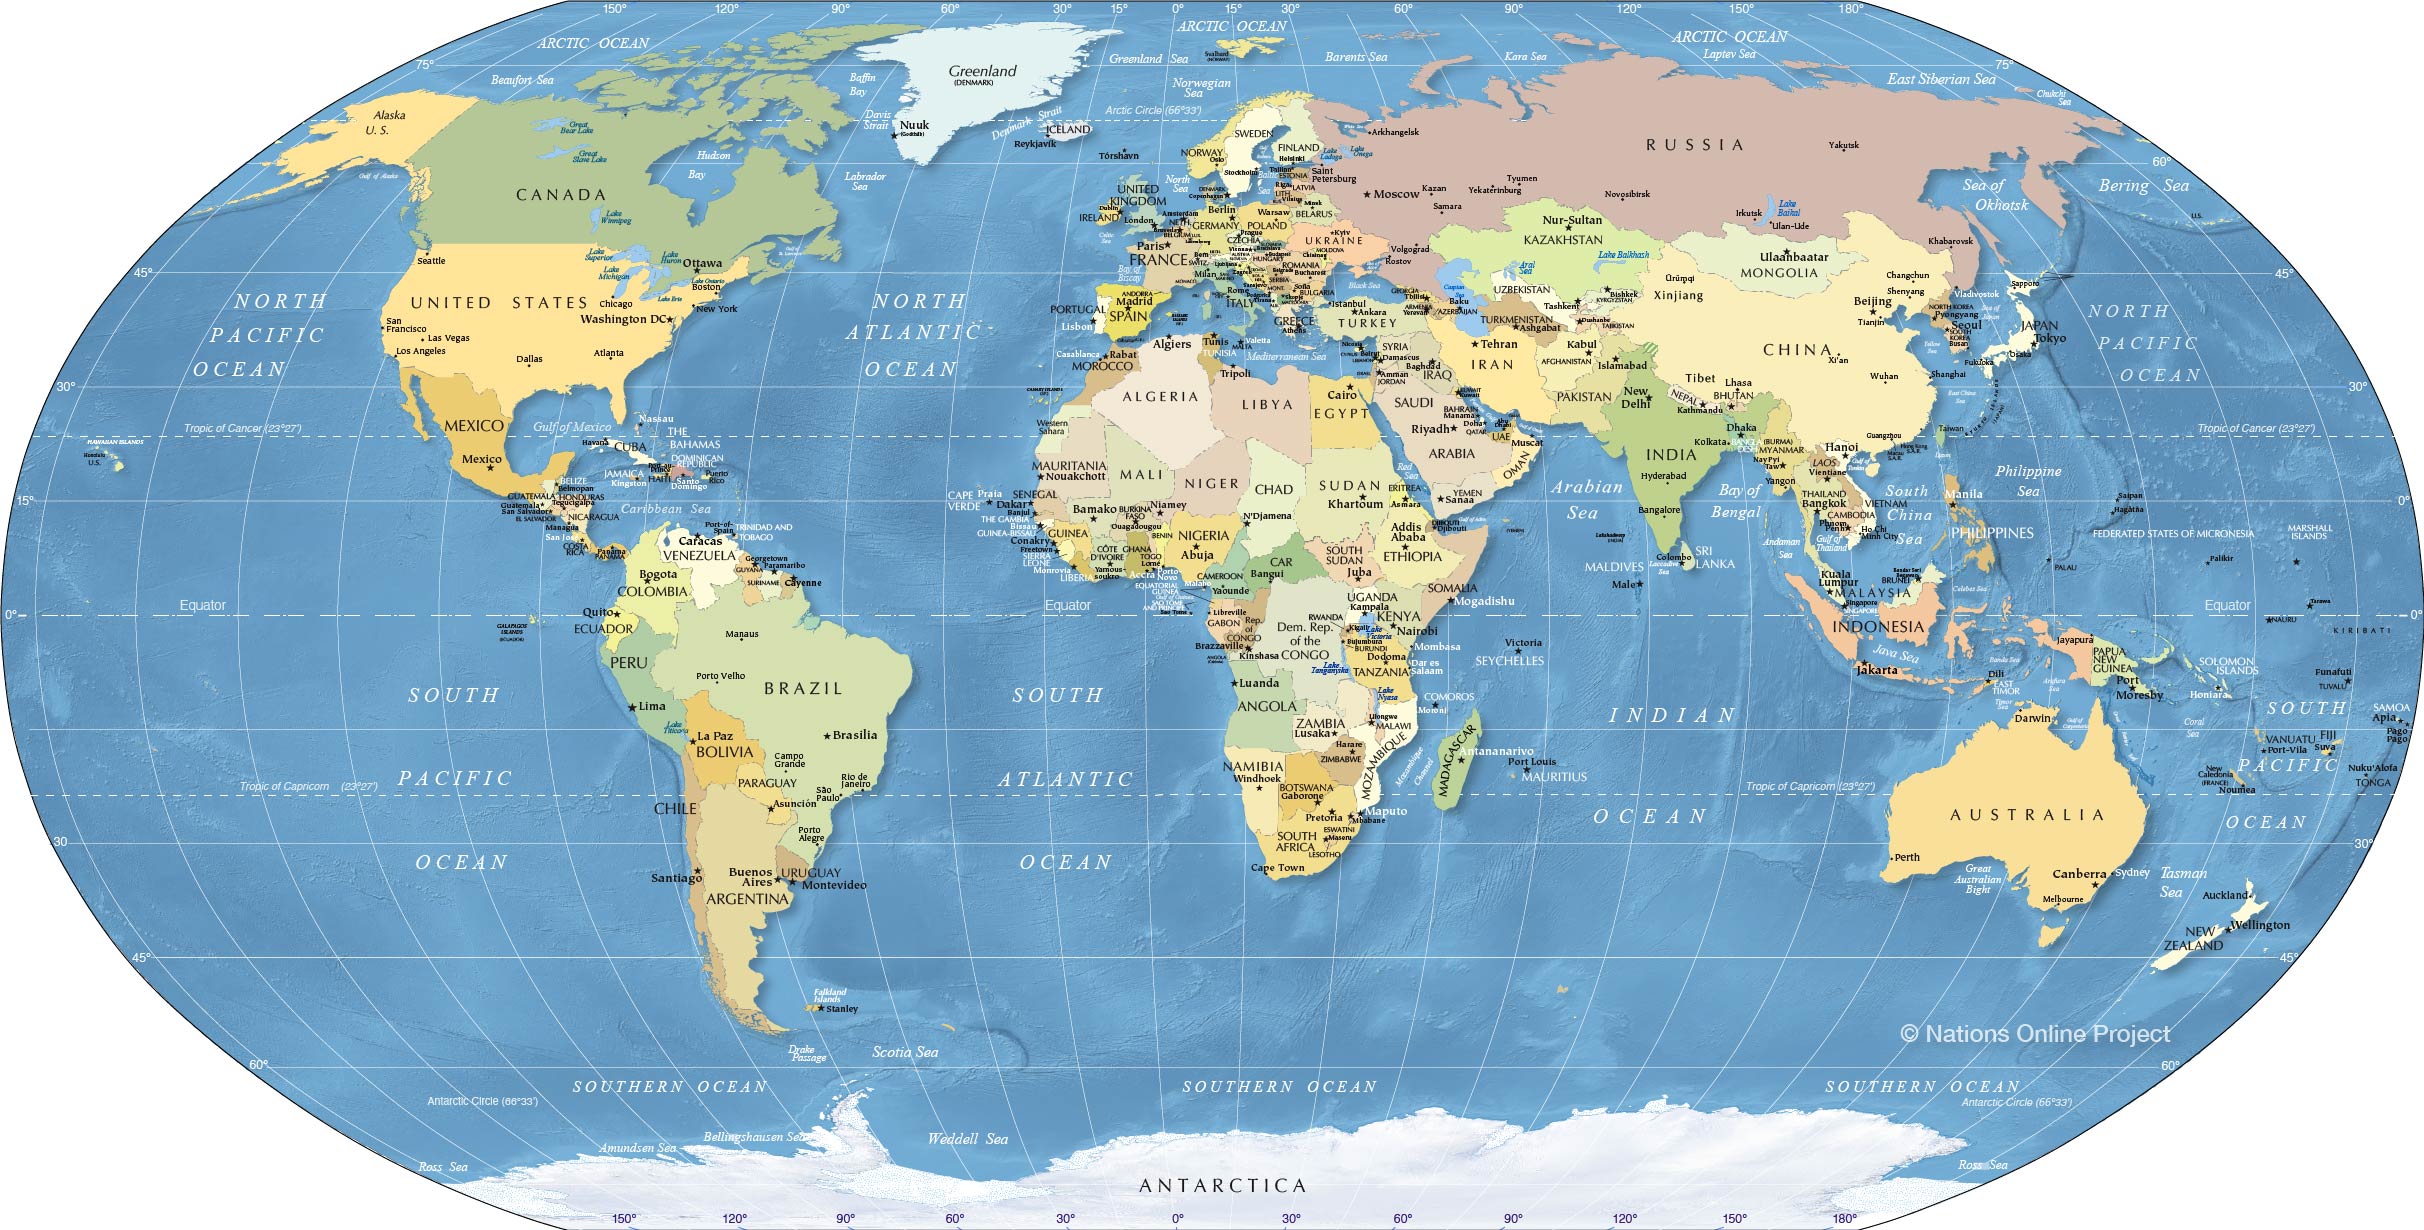 world-map-political-map-of-the-world-nations-online-project